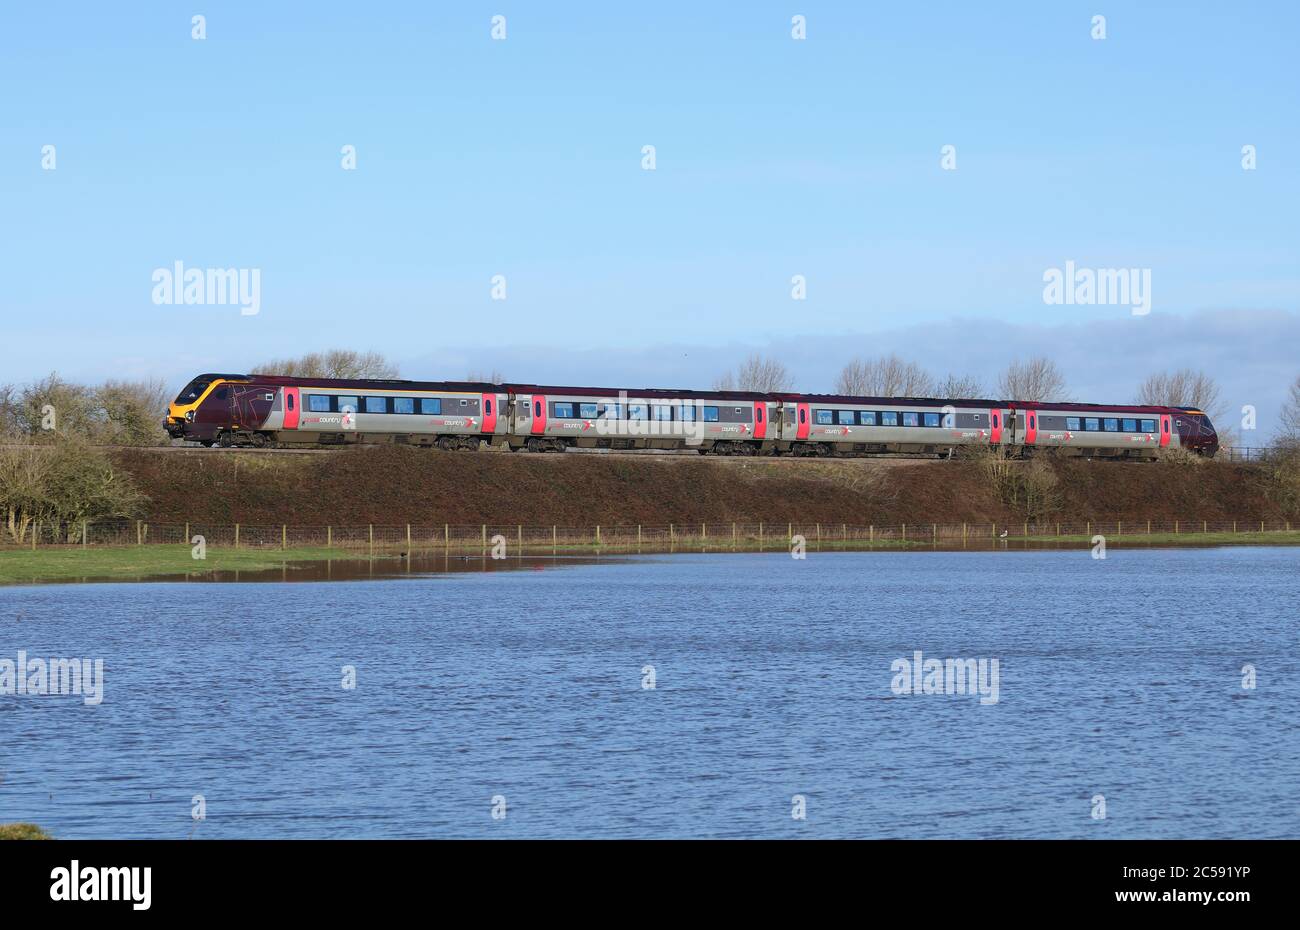 Class 220 Voyager diesel-electric passenger train, passing flooded land in Staffordshire, England, UK. Stock Photo